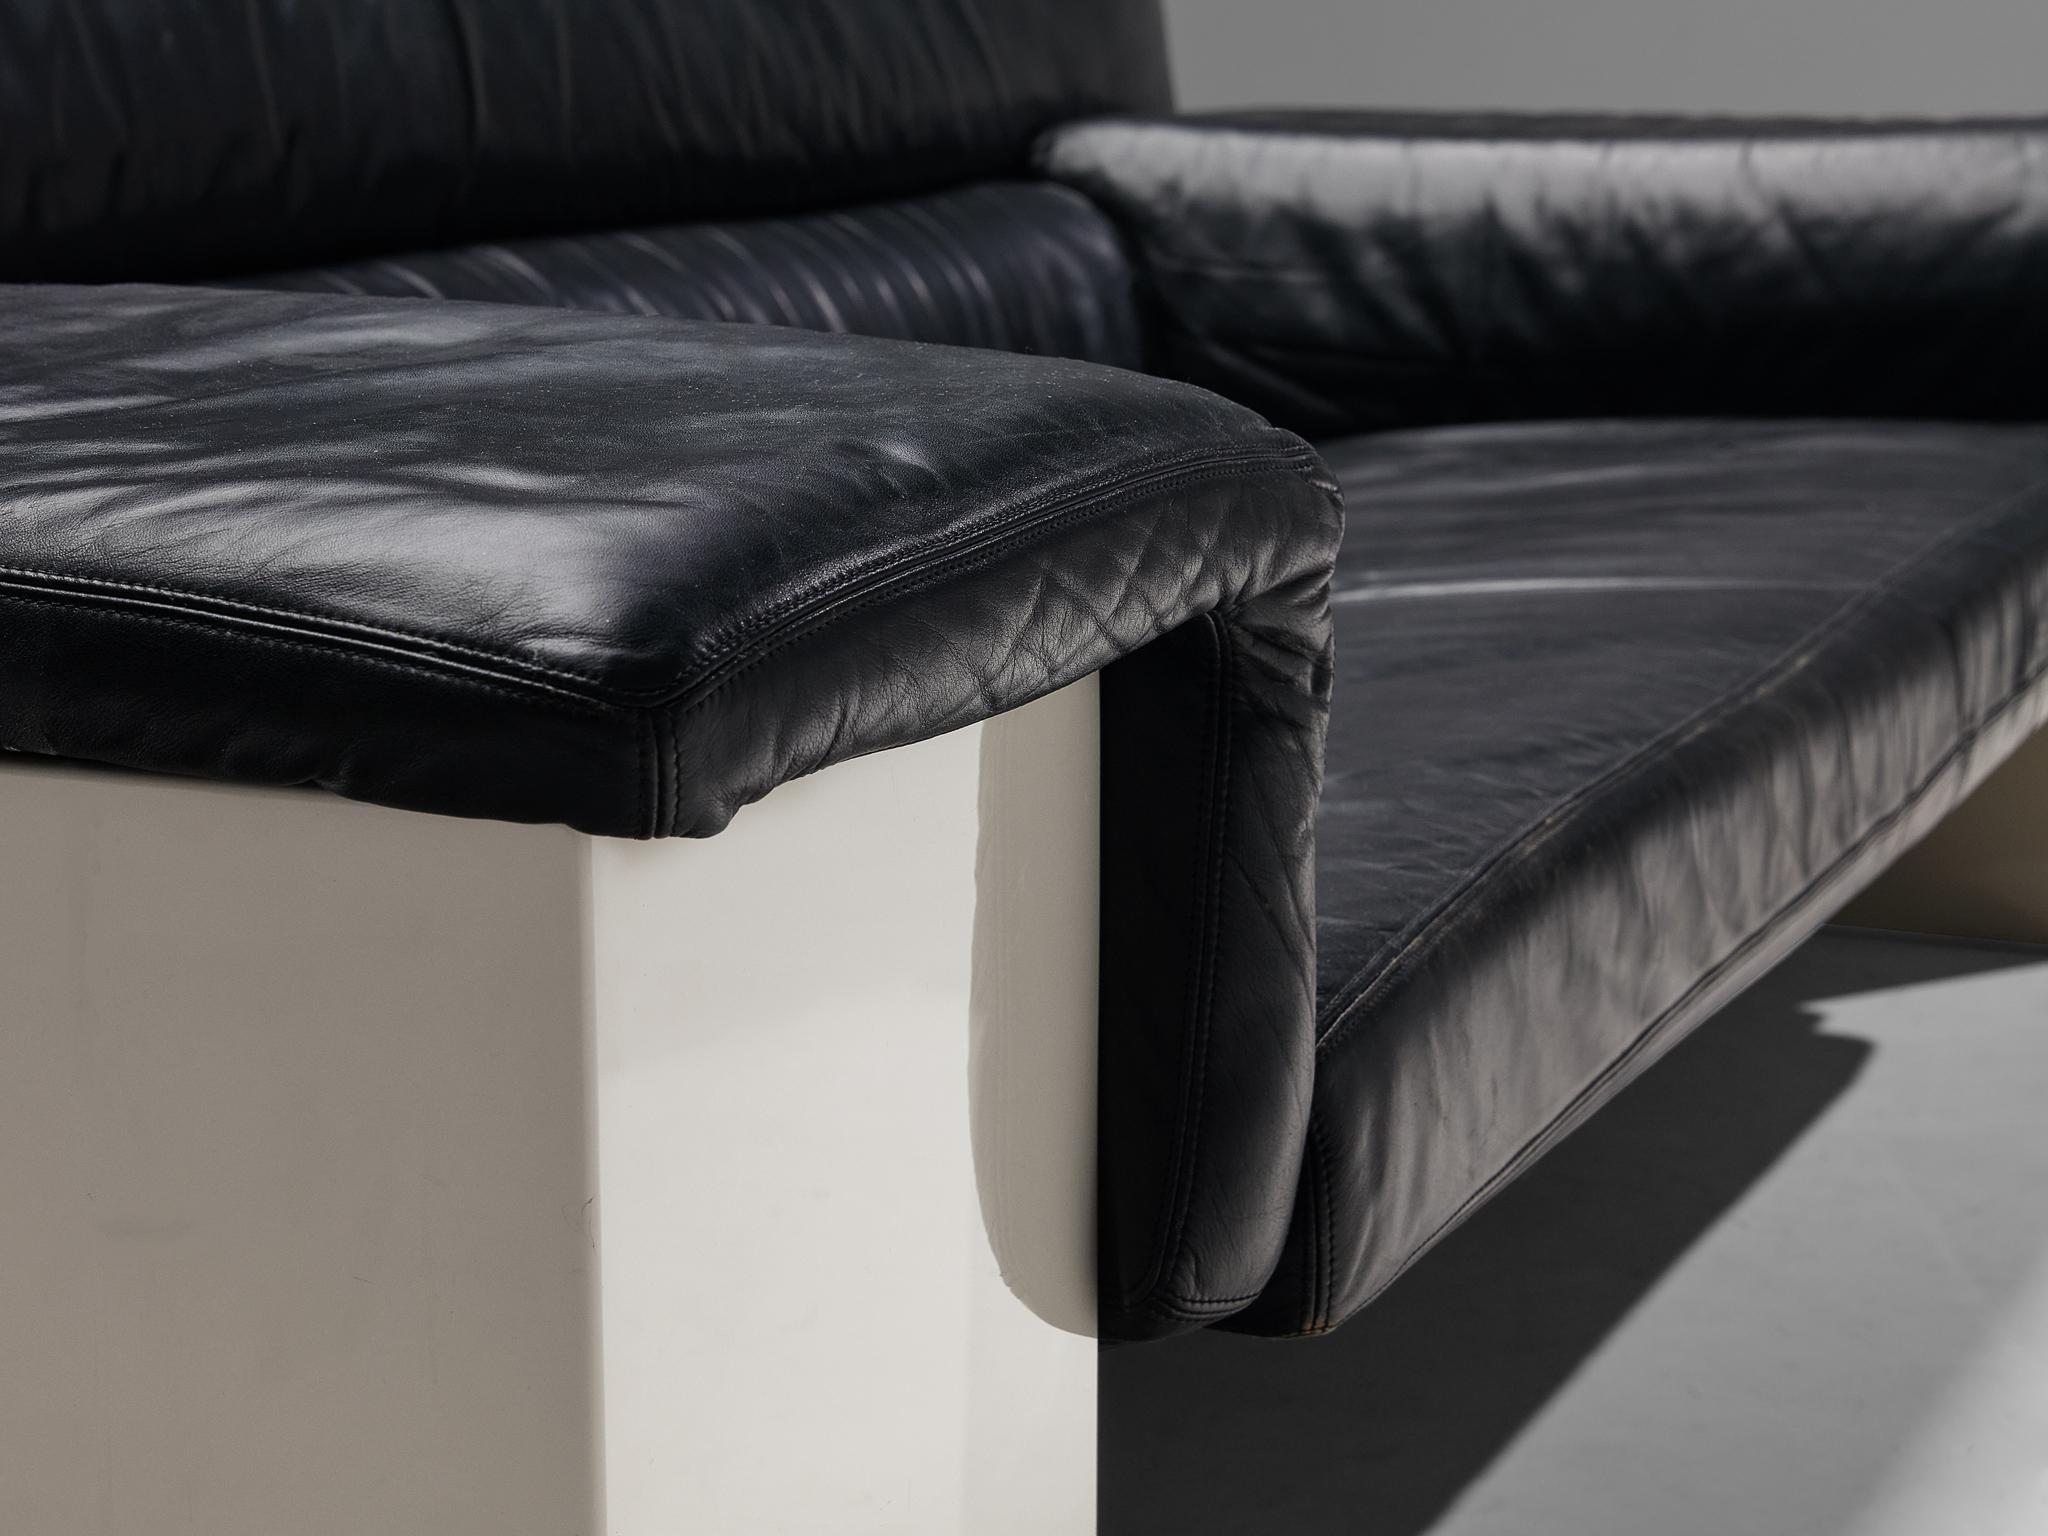 Post-Modern Cini Boeri for Knoll Three Seater Sofa in Black Leather For Sale